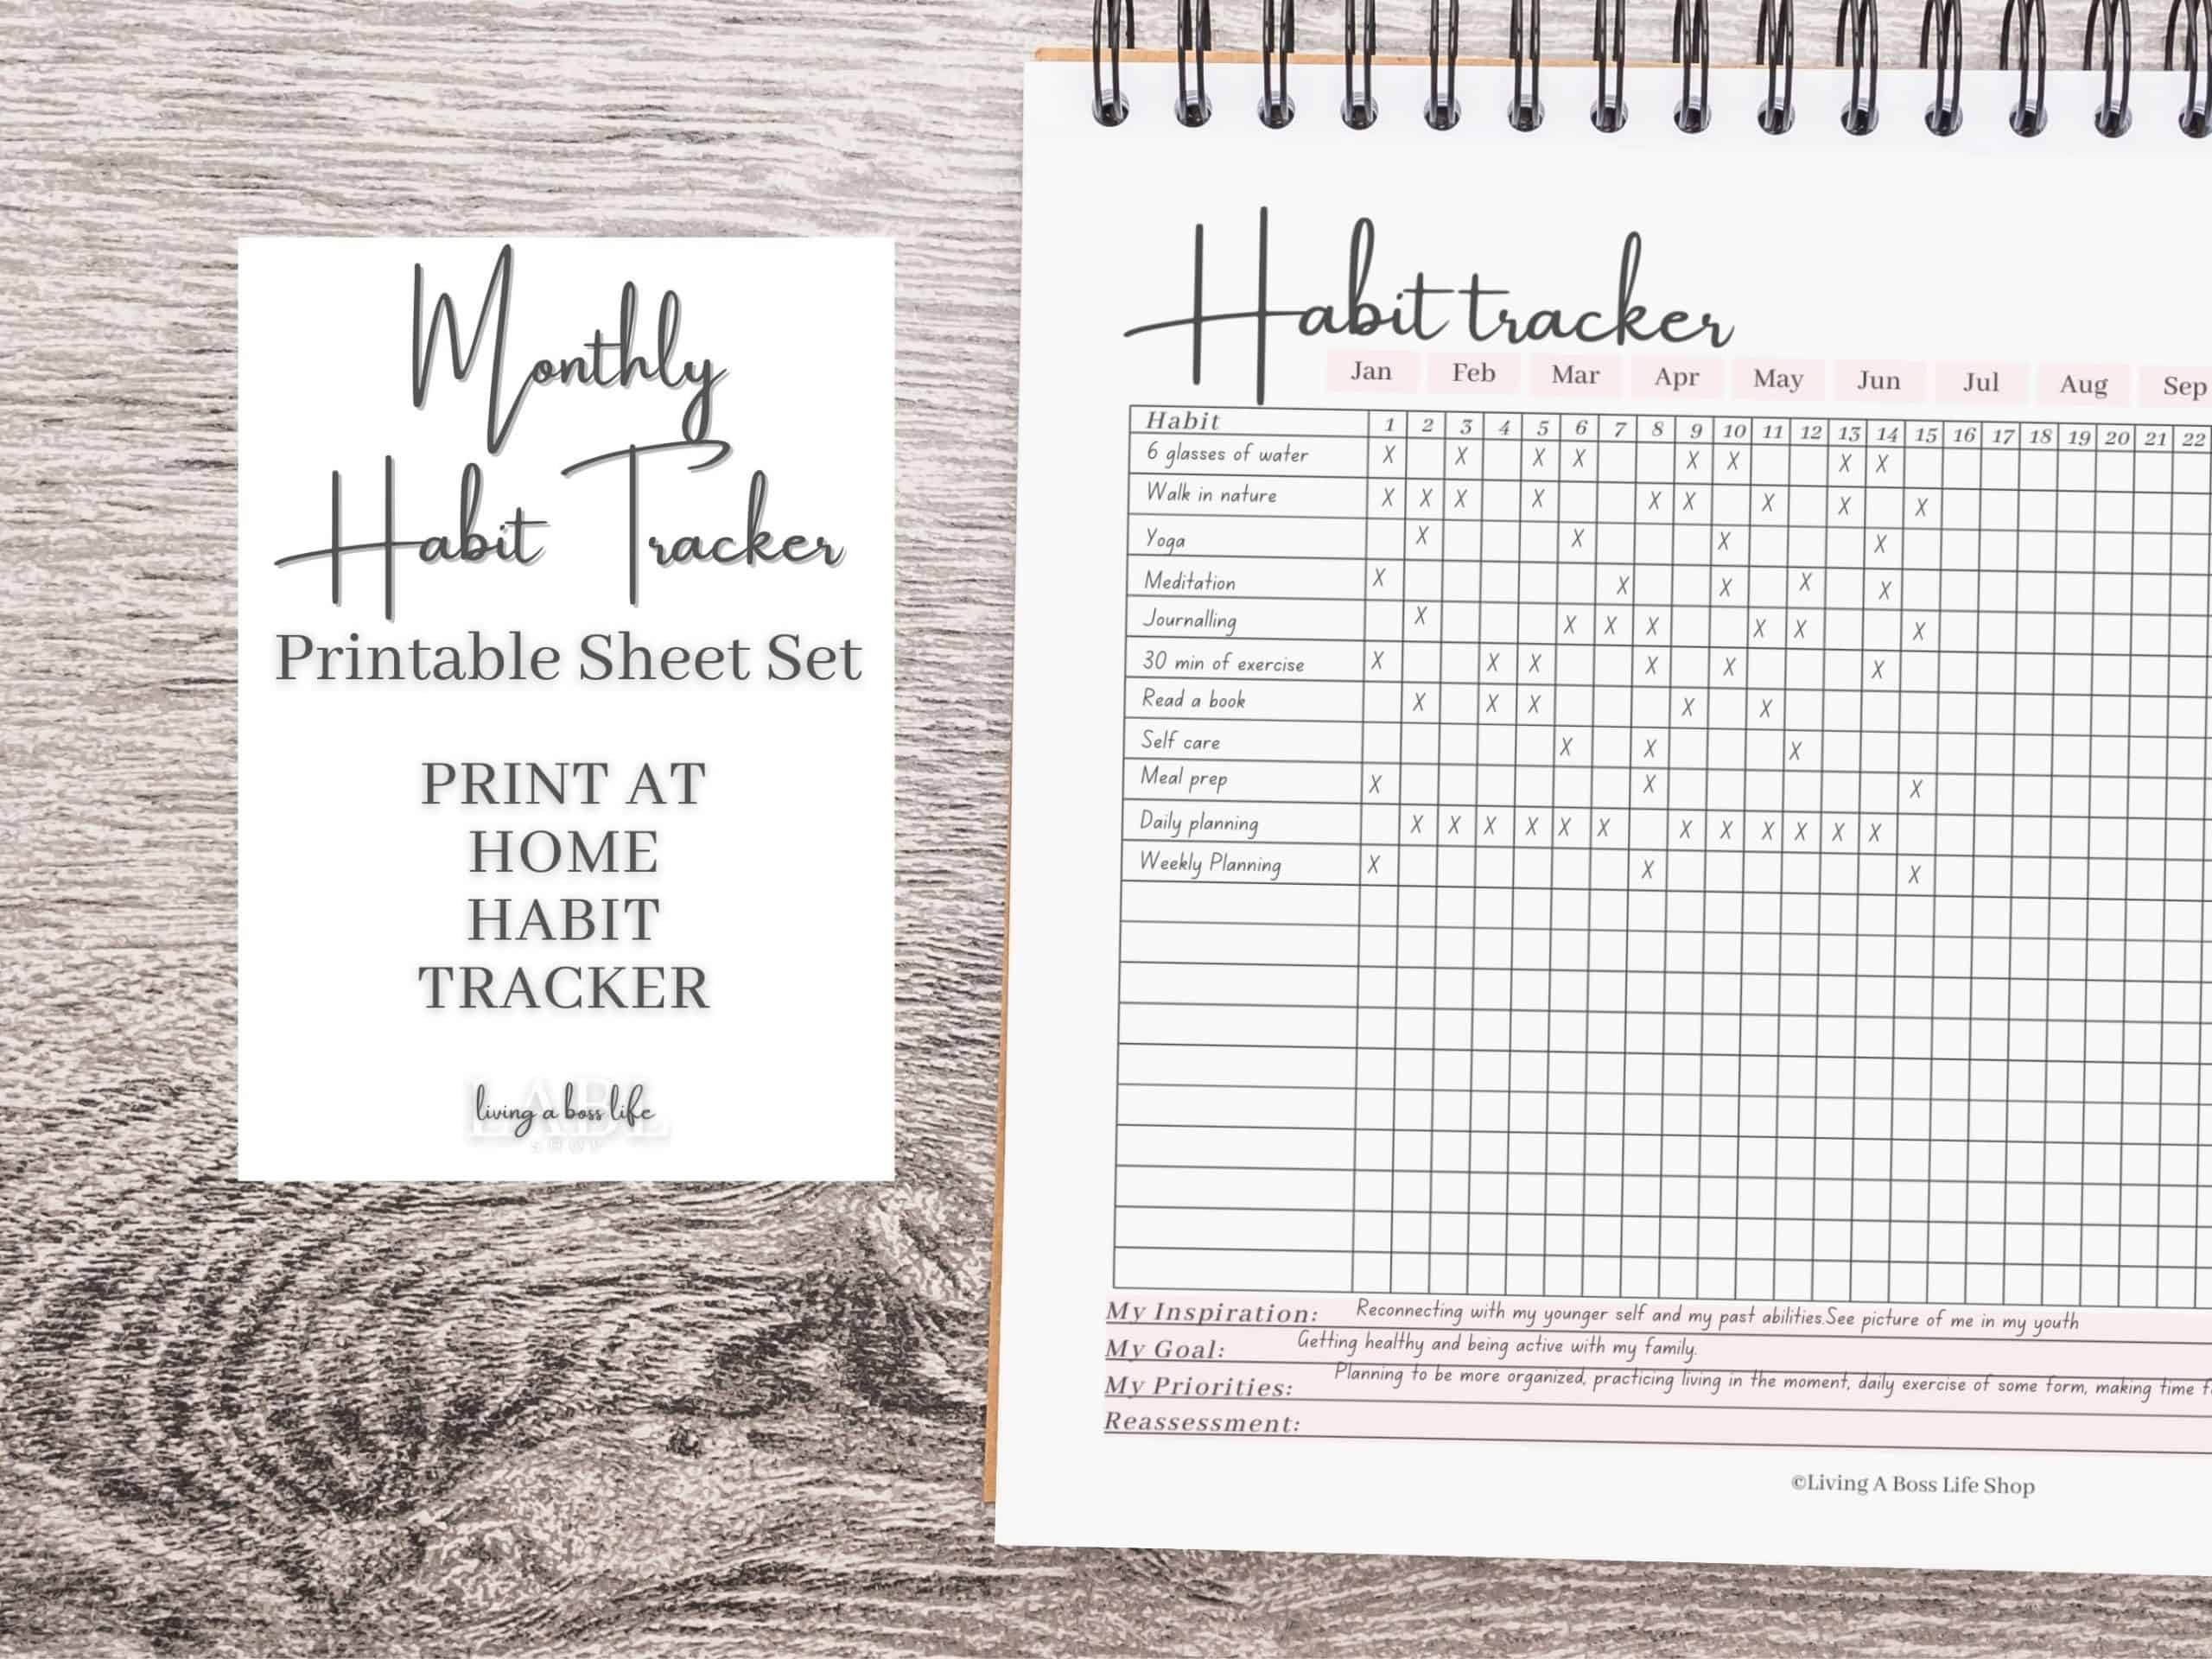 Looking for a way to keep track of all your healthy habits? Here are 8 beautiful healthy habit tracker printable downloads that keep track of all your healthy (or not-so-healthy) habits!Track your sleep, water, exercise, tech use and more. Habit trackers don't need to be just for healthy habits, track your not-so-healthy habits as you try to eliminate them to see how far you have come! You have got this and these sheets can help you see it for yourself!You can print these pages out and use them over and over every month!There is also space for inspiration, goals, priorities and reassessment on some of the sheets. Take notes about your progress every month. Great to add to planners!Download your favourite habit tracker sheets today!